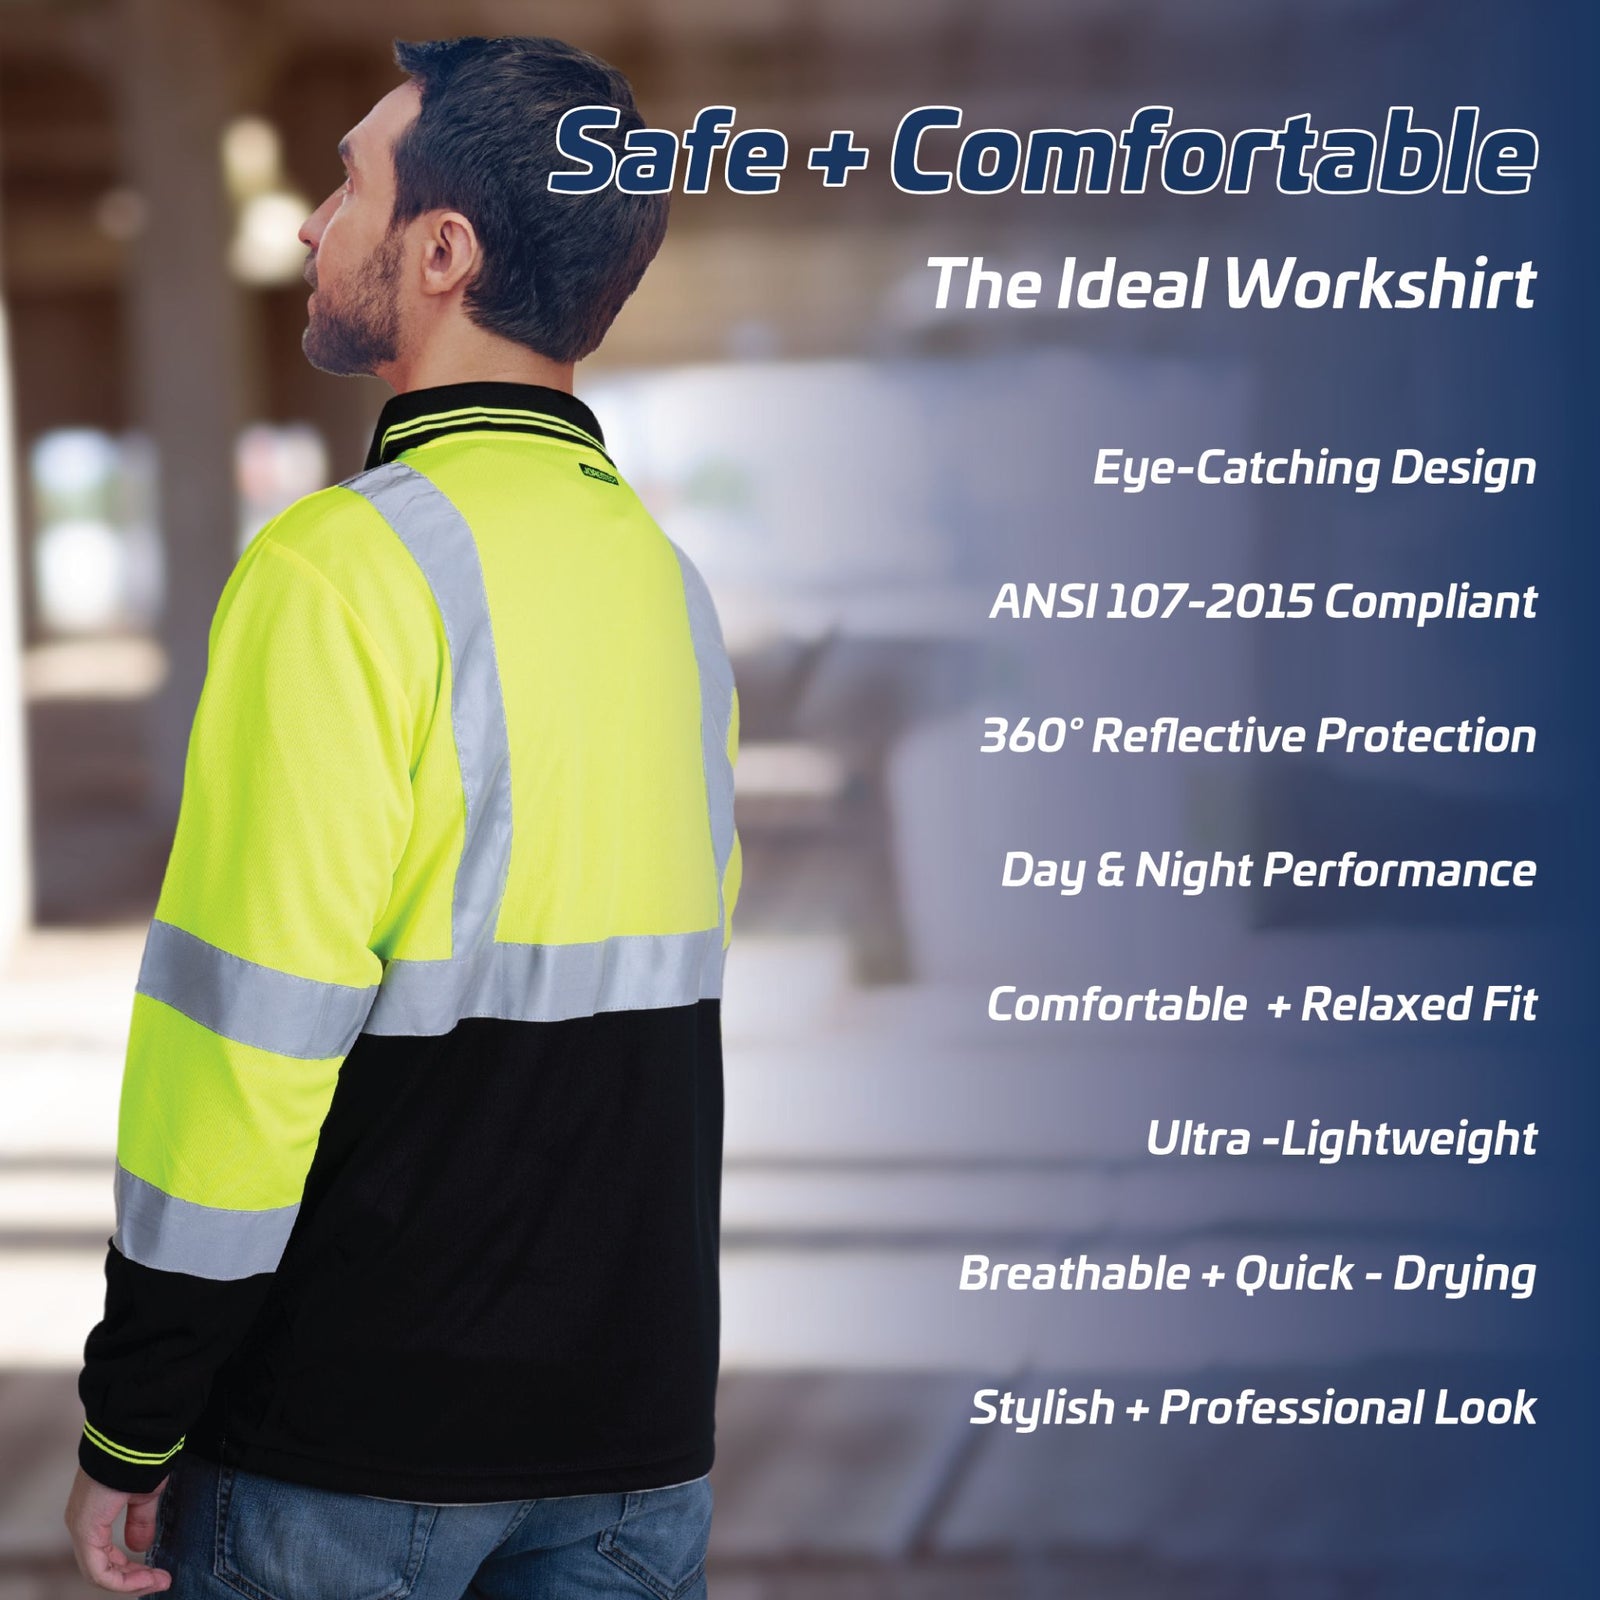 Worker wearing the black Safety long sleeve polo shirt with reflective strips. Text: Safe and comfortable, ideal work shirt, eye catching design, Ansi Isea compliant, 360 reflective protection, day and night performance, relaxed fit shirt, ultra lightweight, breathable, quick drying, stylish professional look